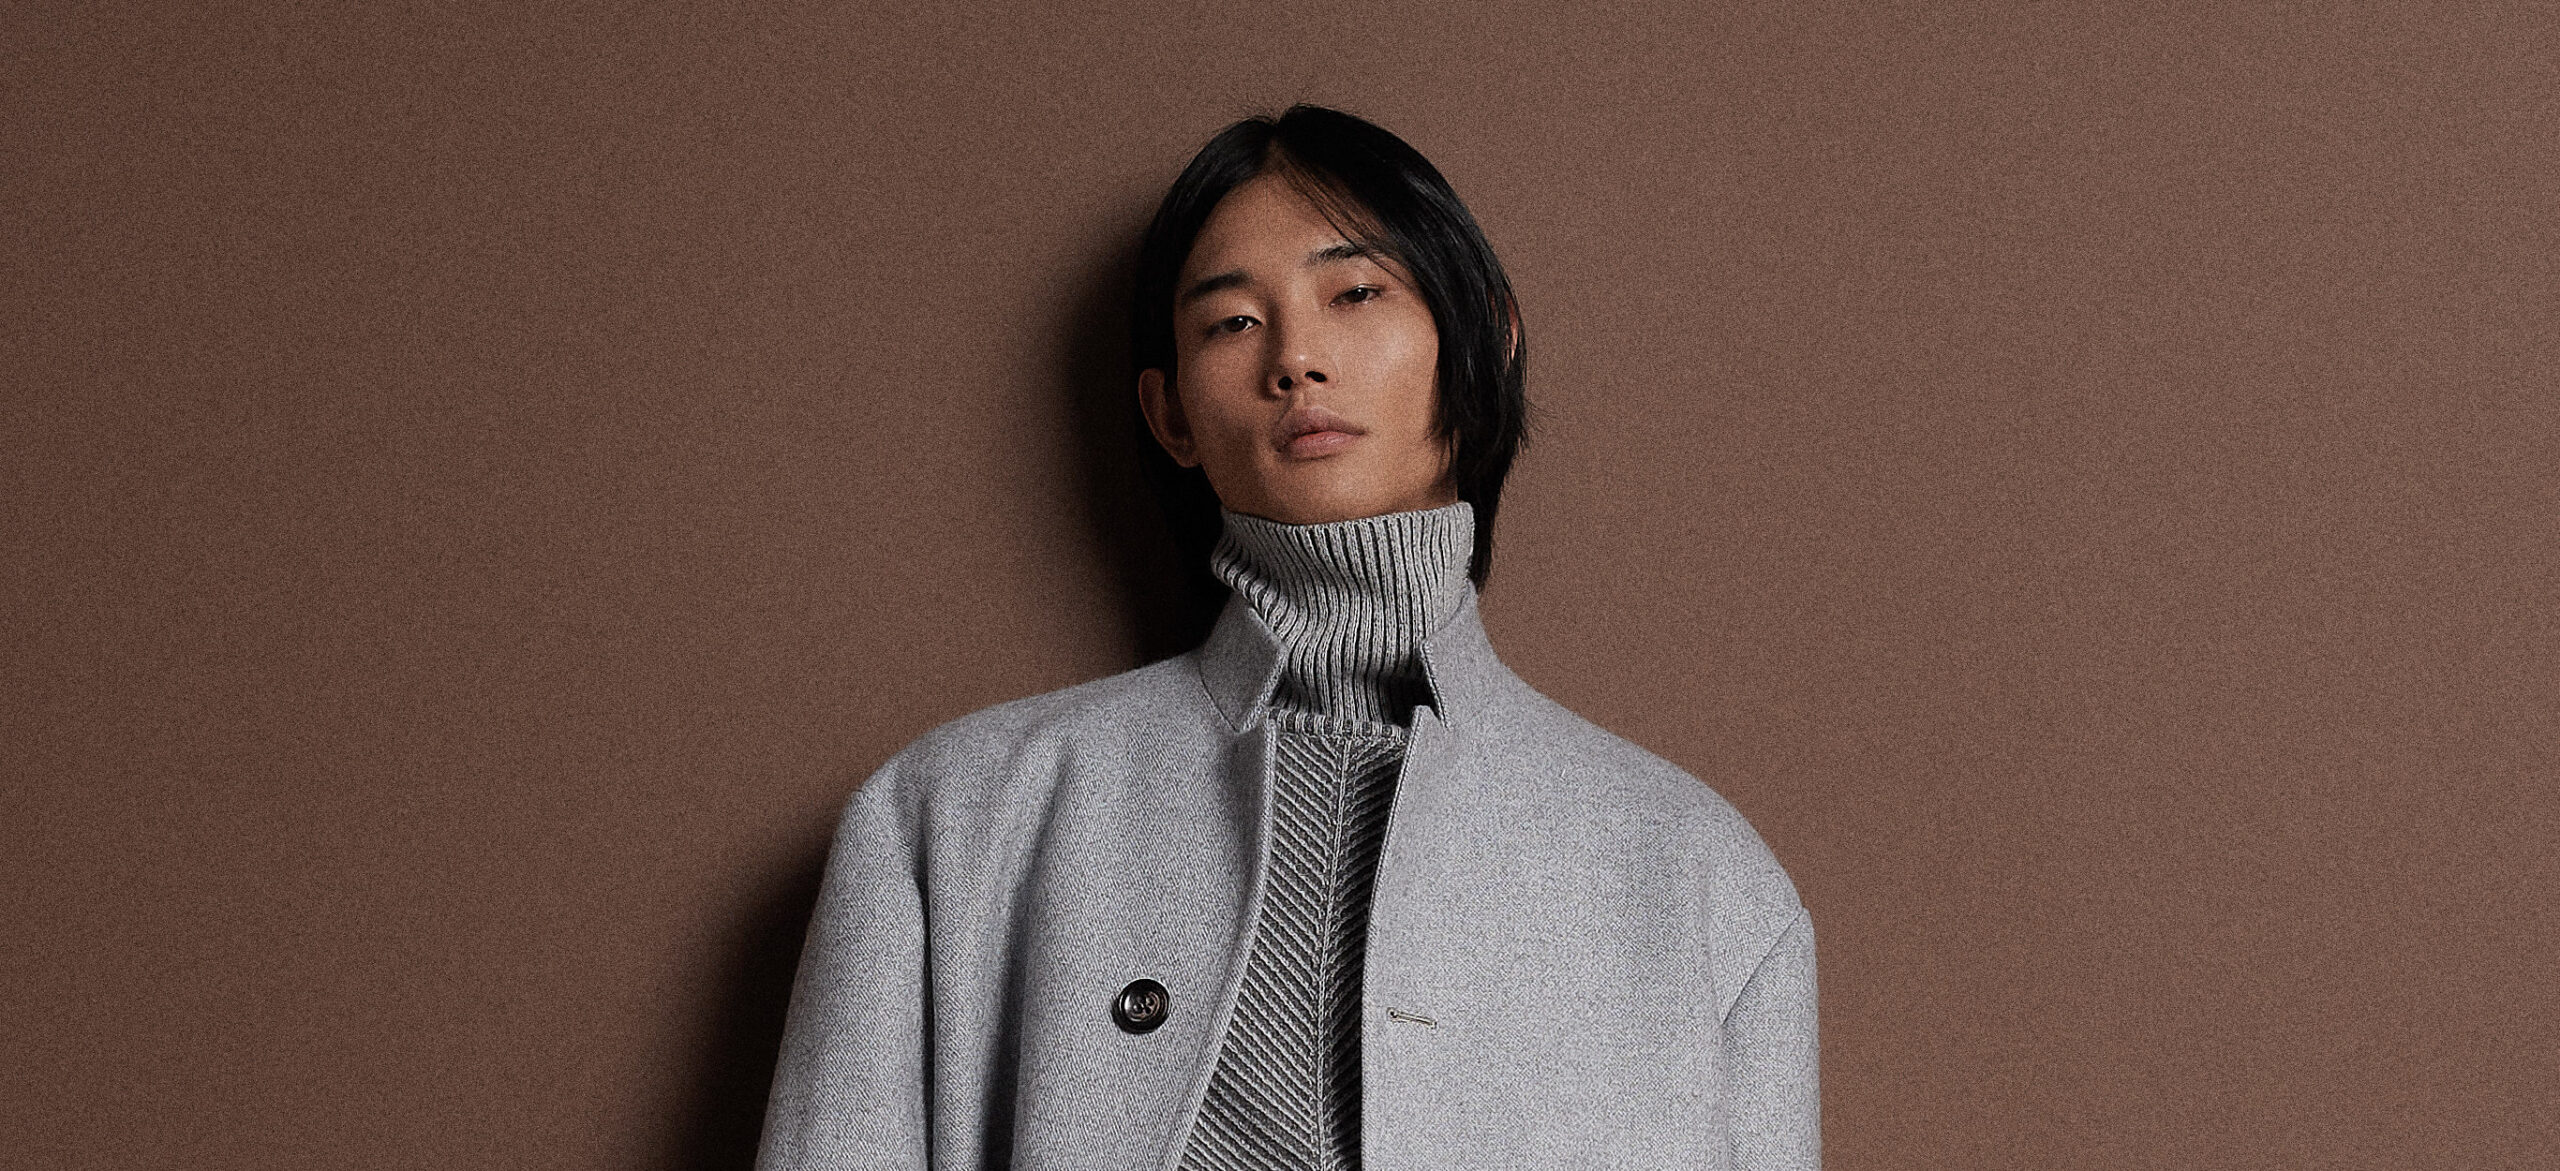 A model from KITON's AW24-25 collection stands against a warm earthy backdrop, sporting a grey turtleneck and blazer that epitomize the label's luxurious approach to classic men's fashion.